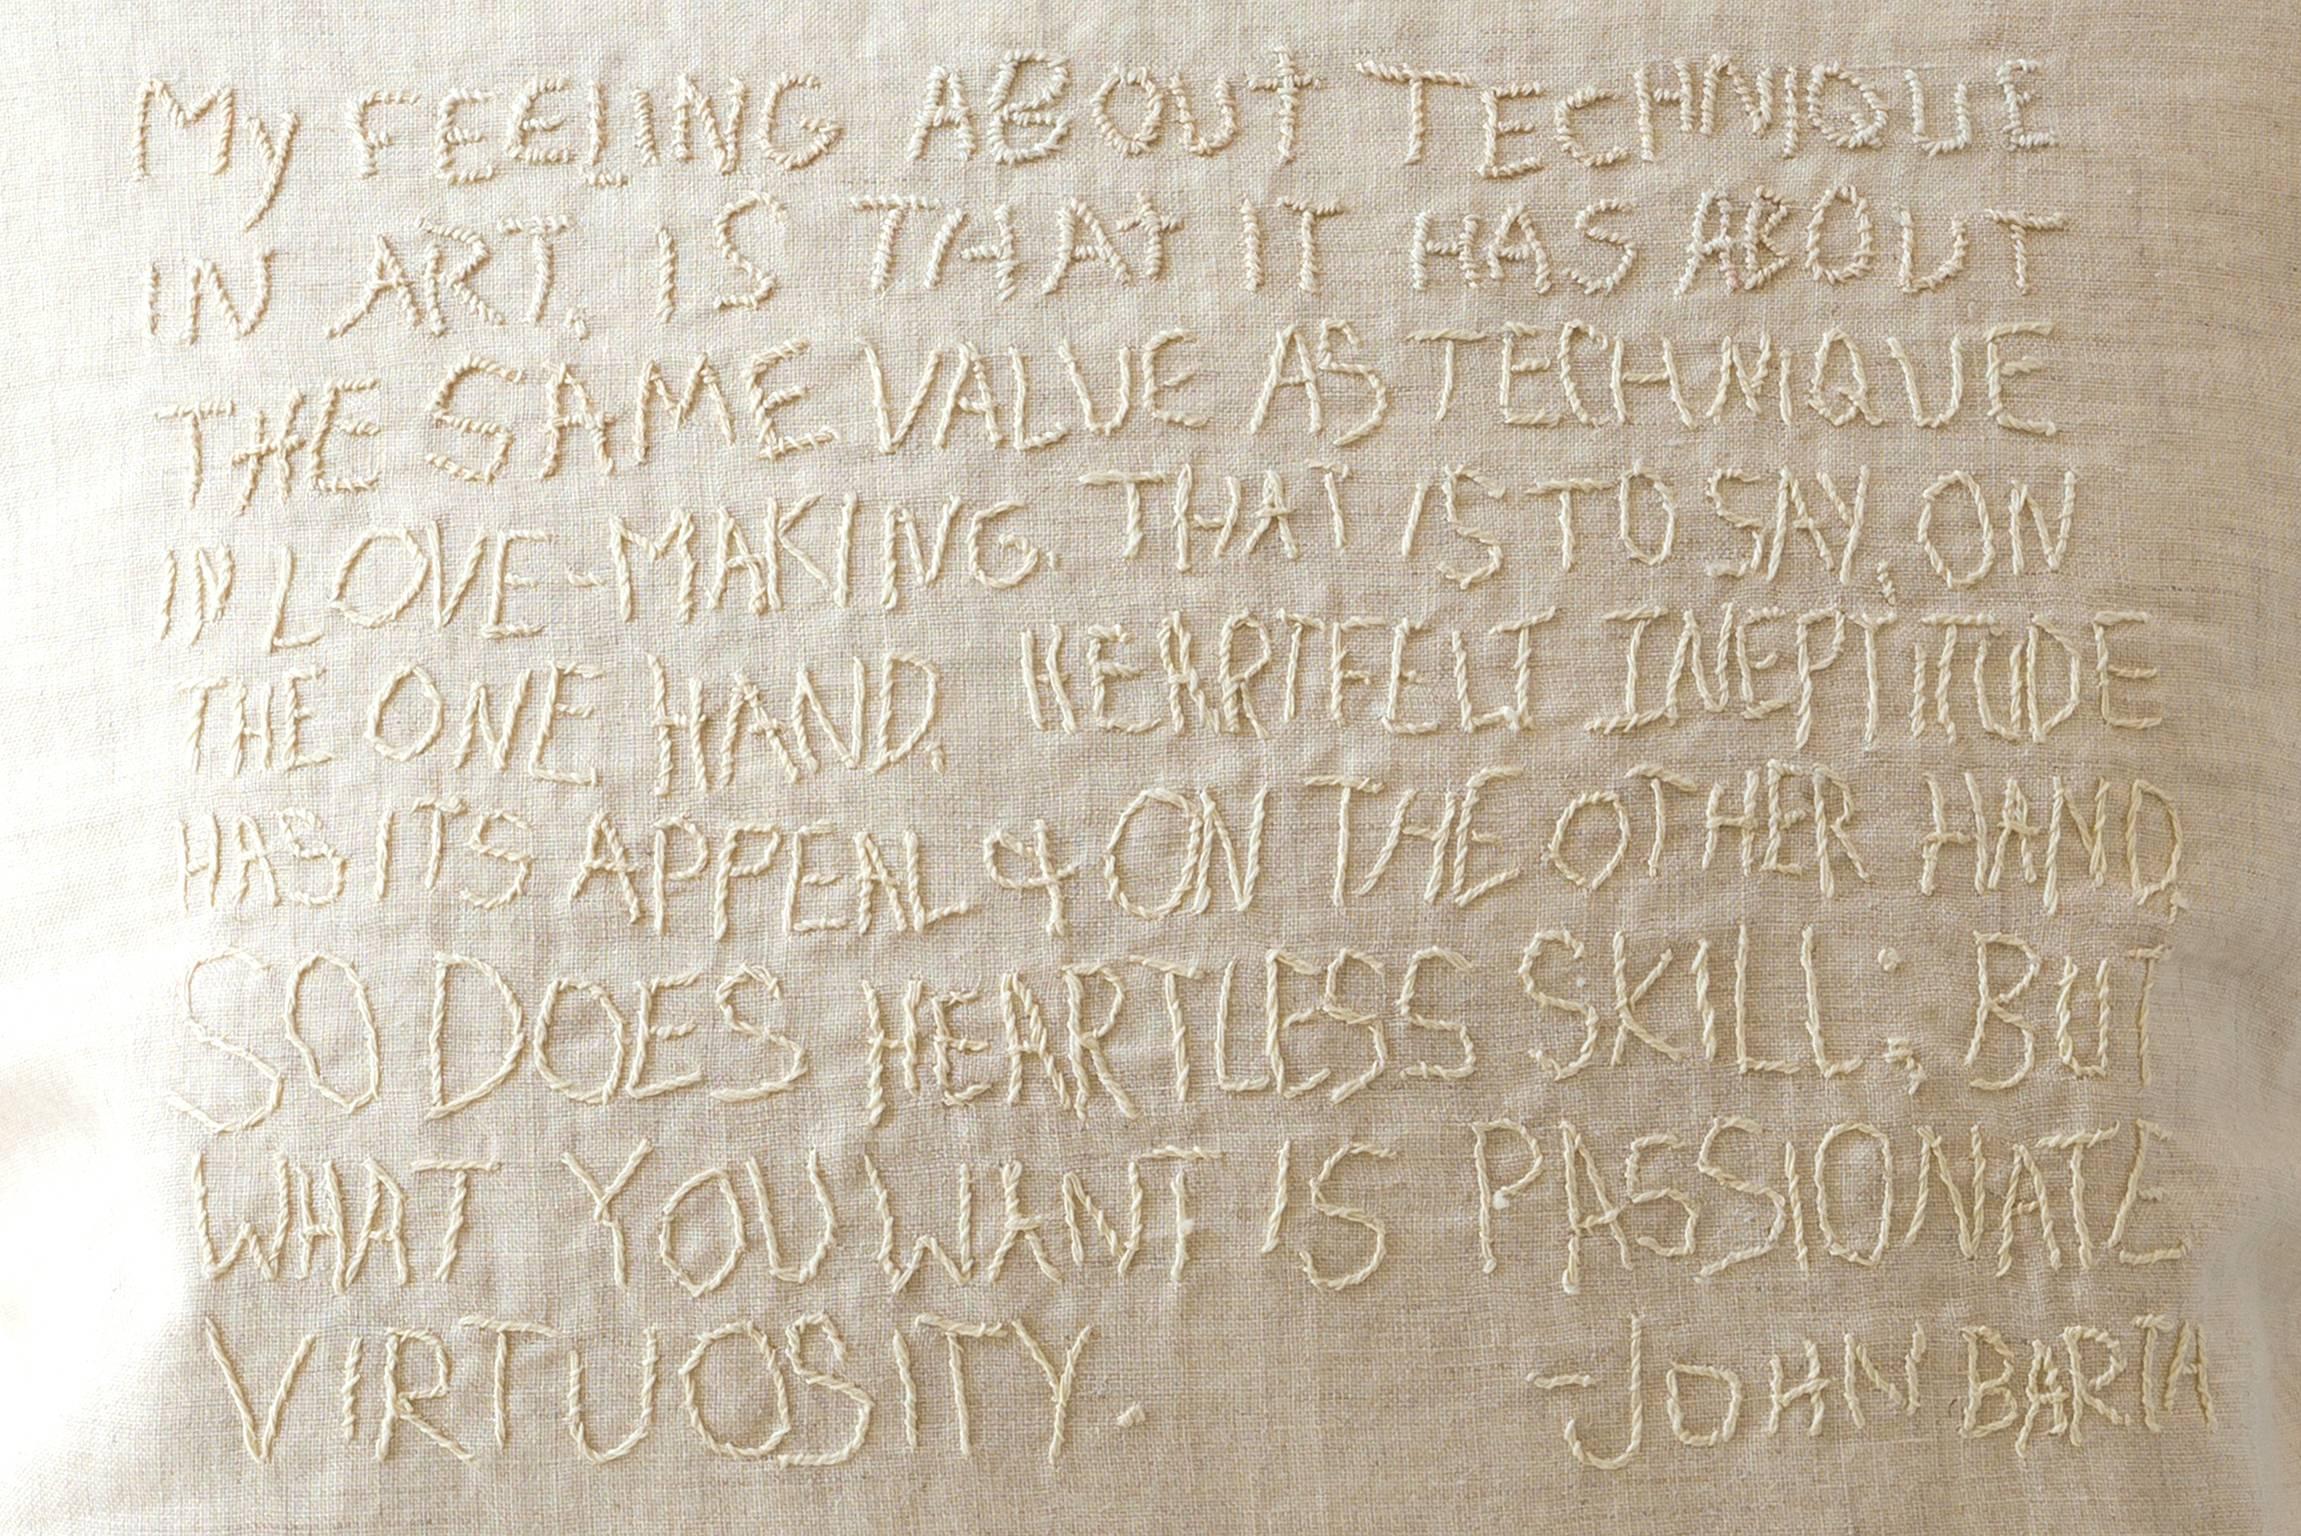 Vintage cotton thread embroidery on a fine linen.

Embroidered into the pillow is a quote by John Barth - My feeling about technique in art is that it has about the same value as technique in lovemaking. That is to say, heartfelt ineptitude has